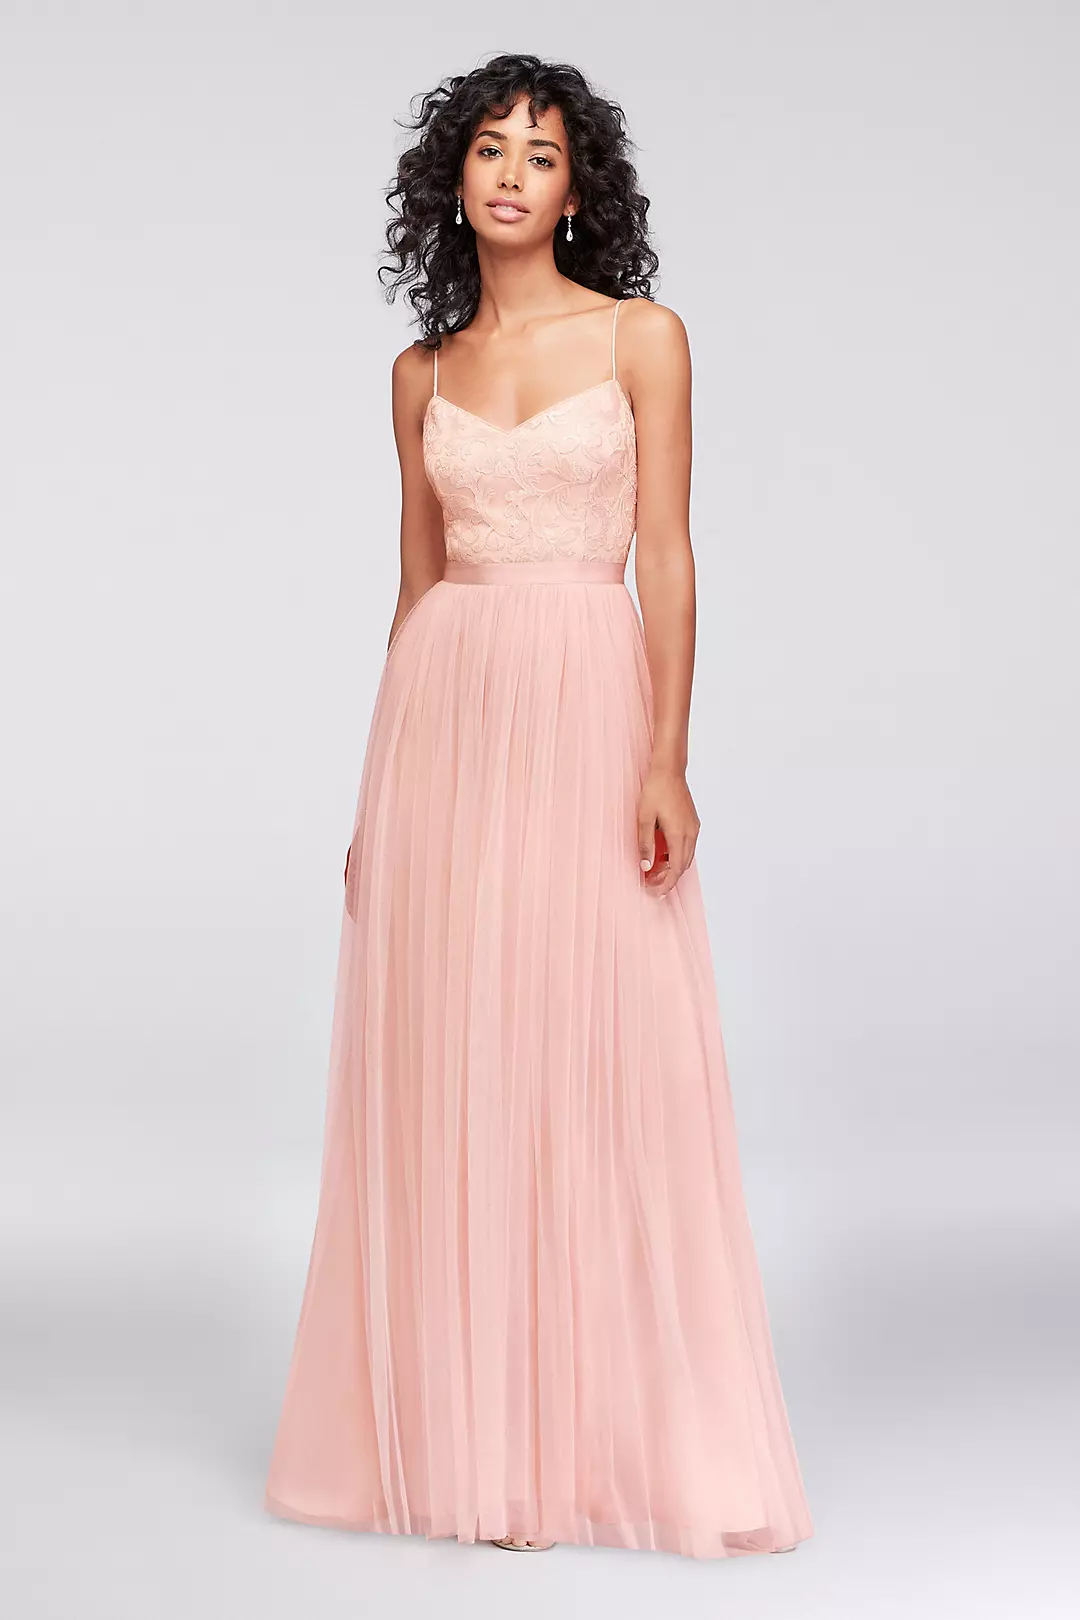 Sequin and Tulle A-Line Bridesmaid Dress Image